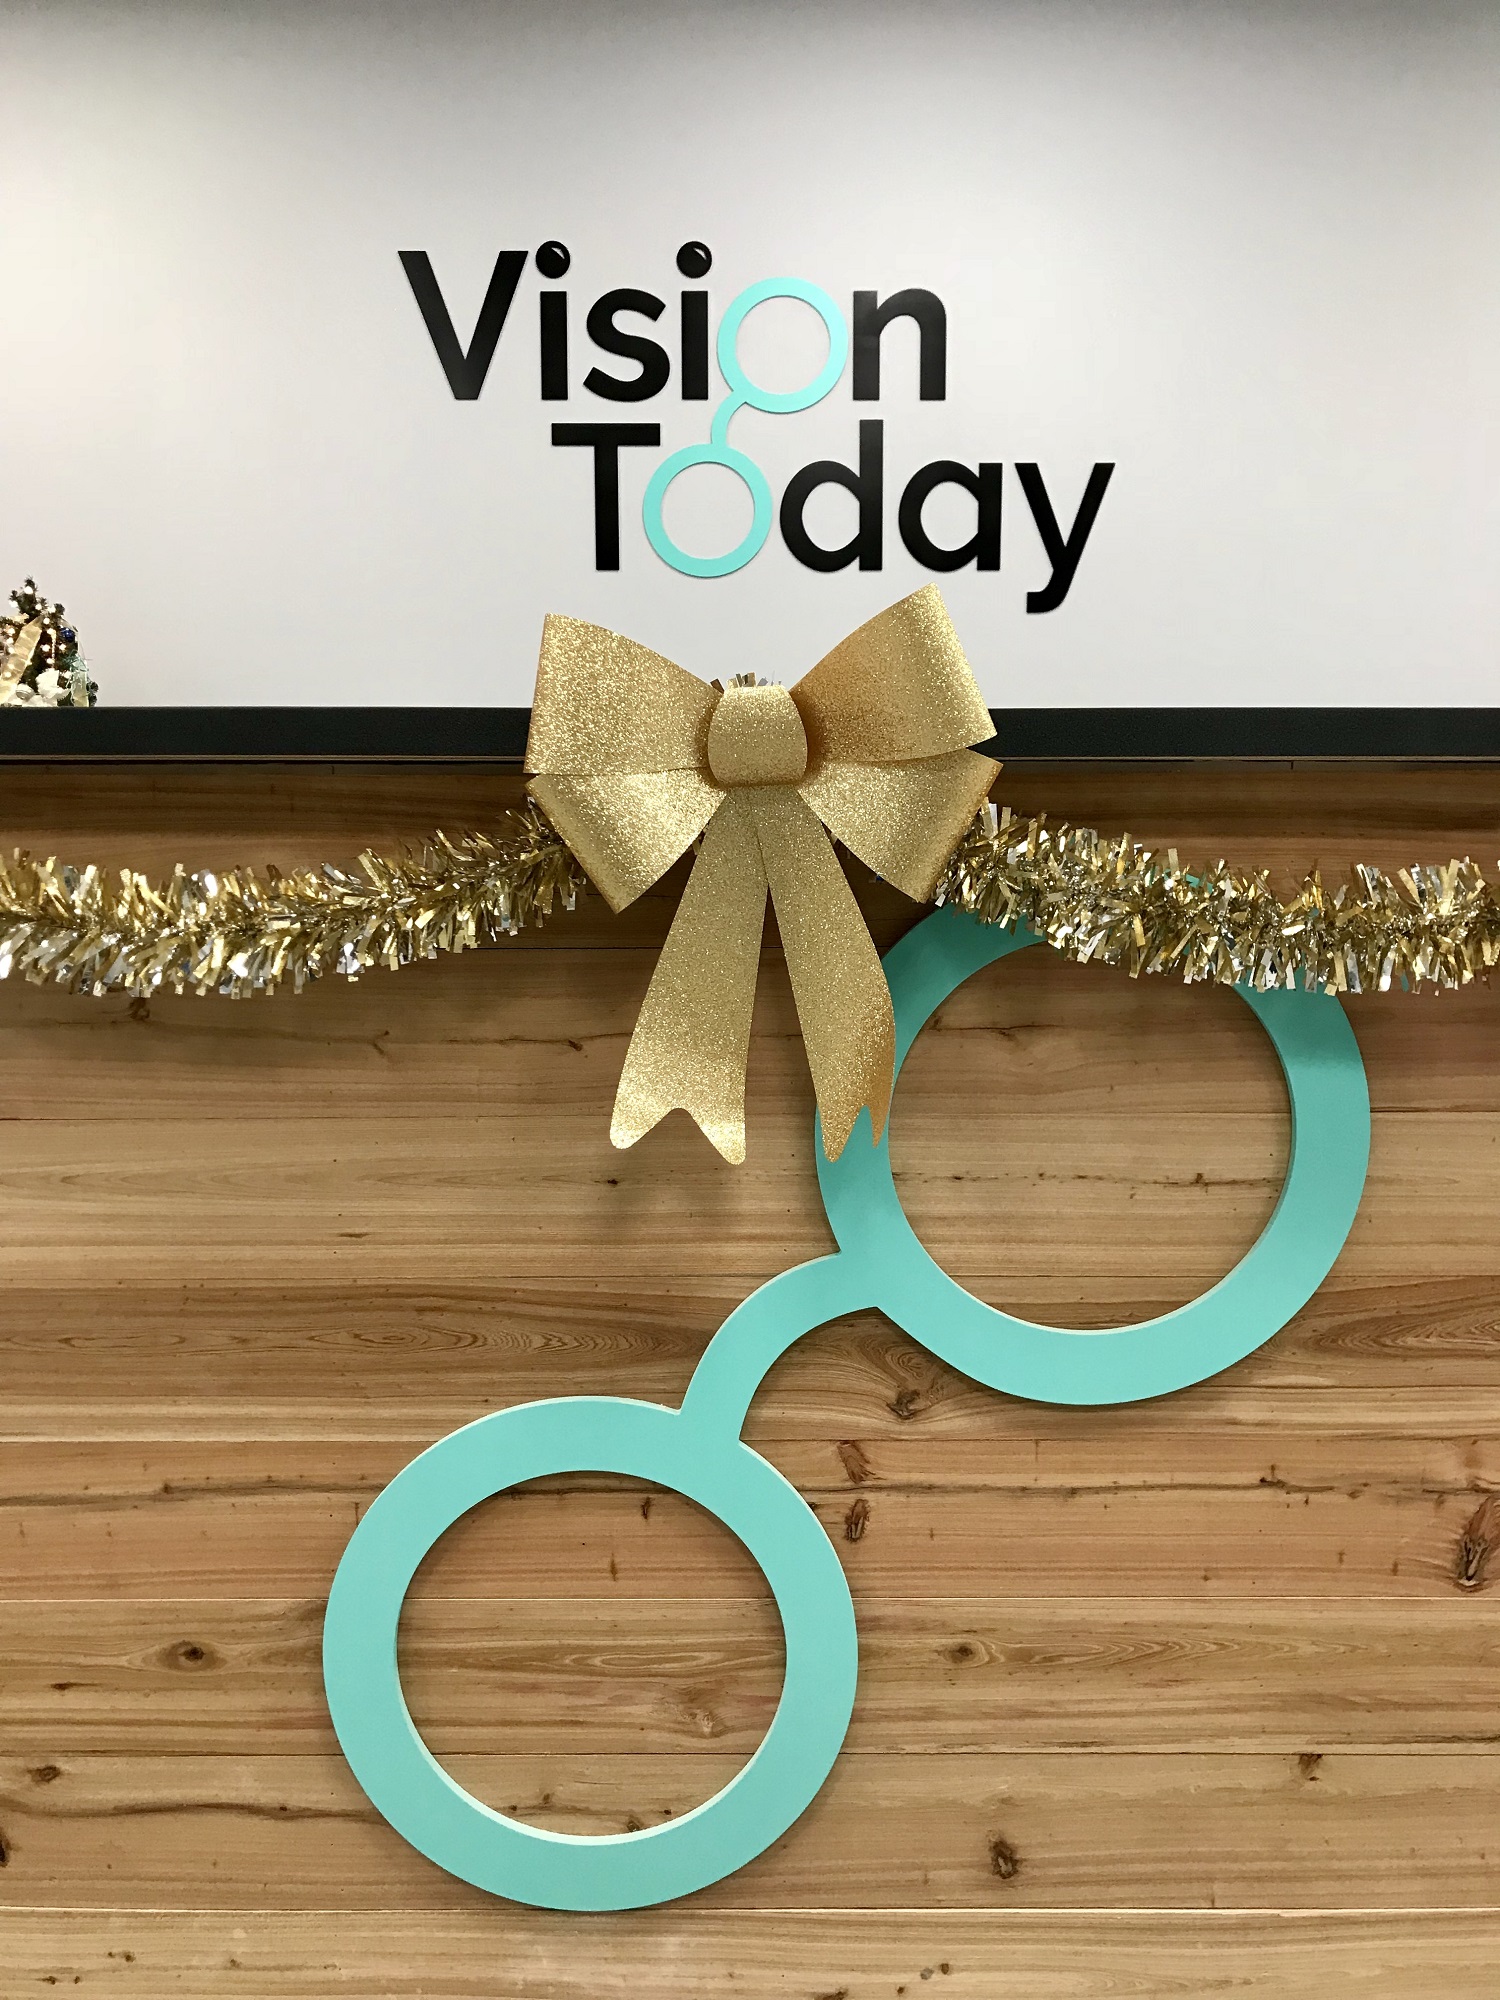 Vision Today sign display